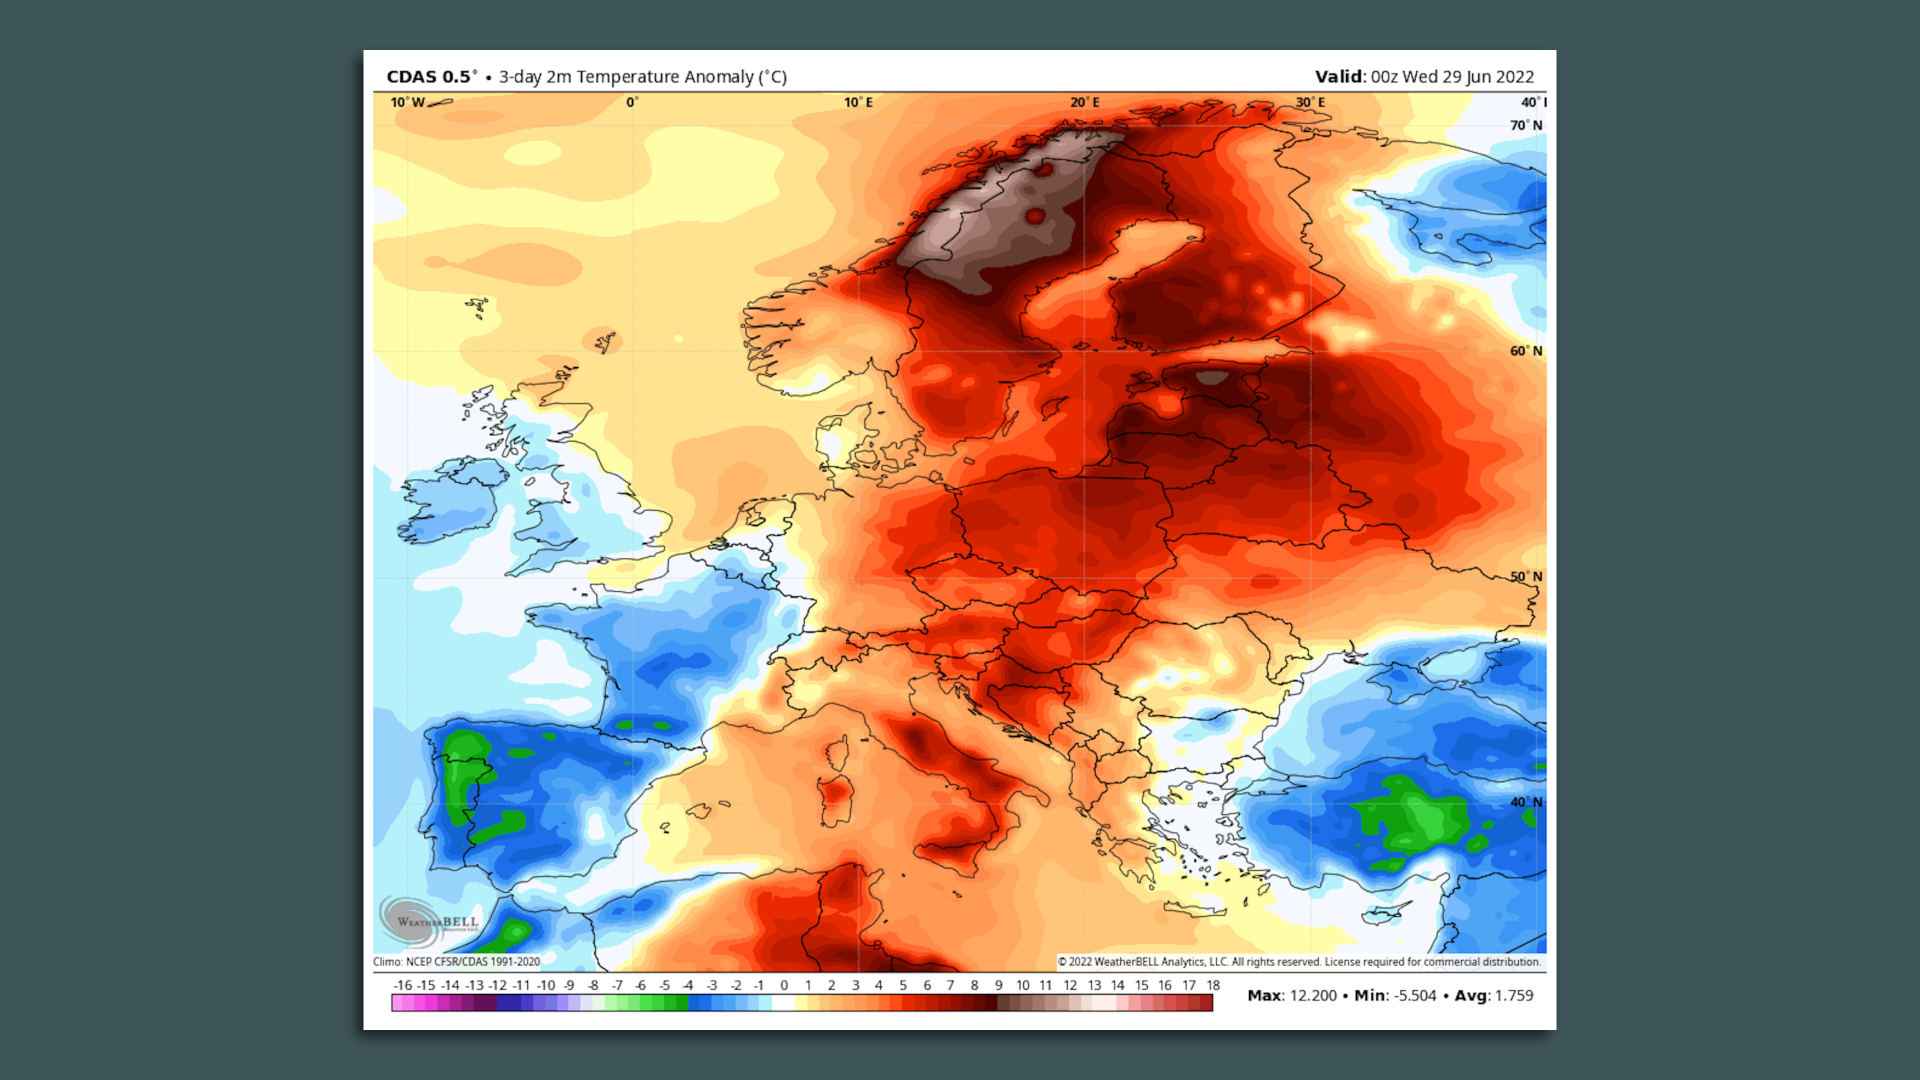 Map showing temperature anomalies during the past 3 days across Europe.